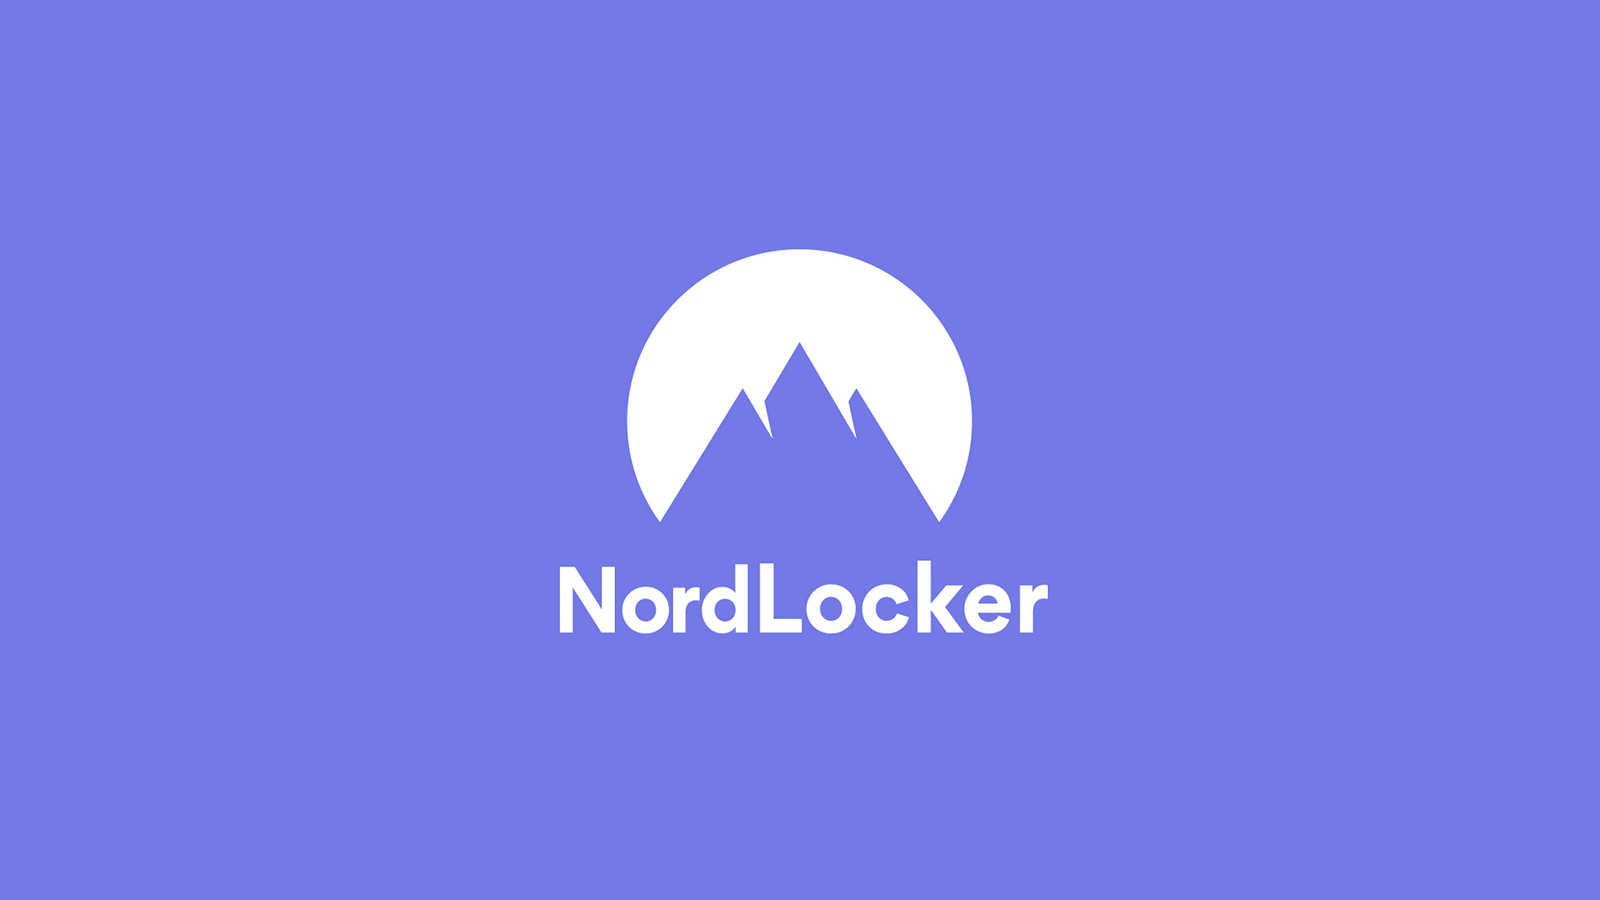 New Nordlocker research explores people’s habits related to file storage and more